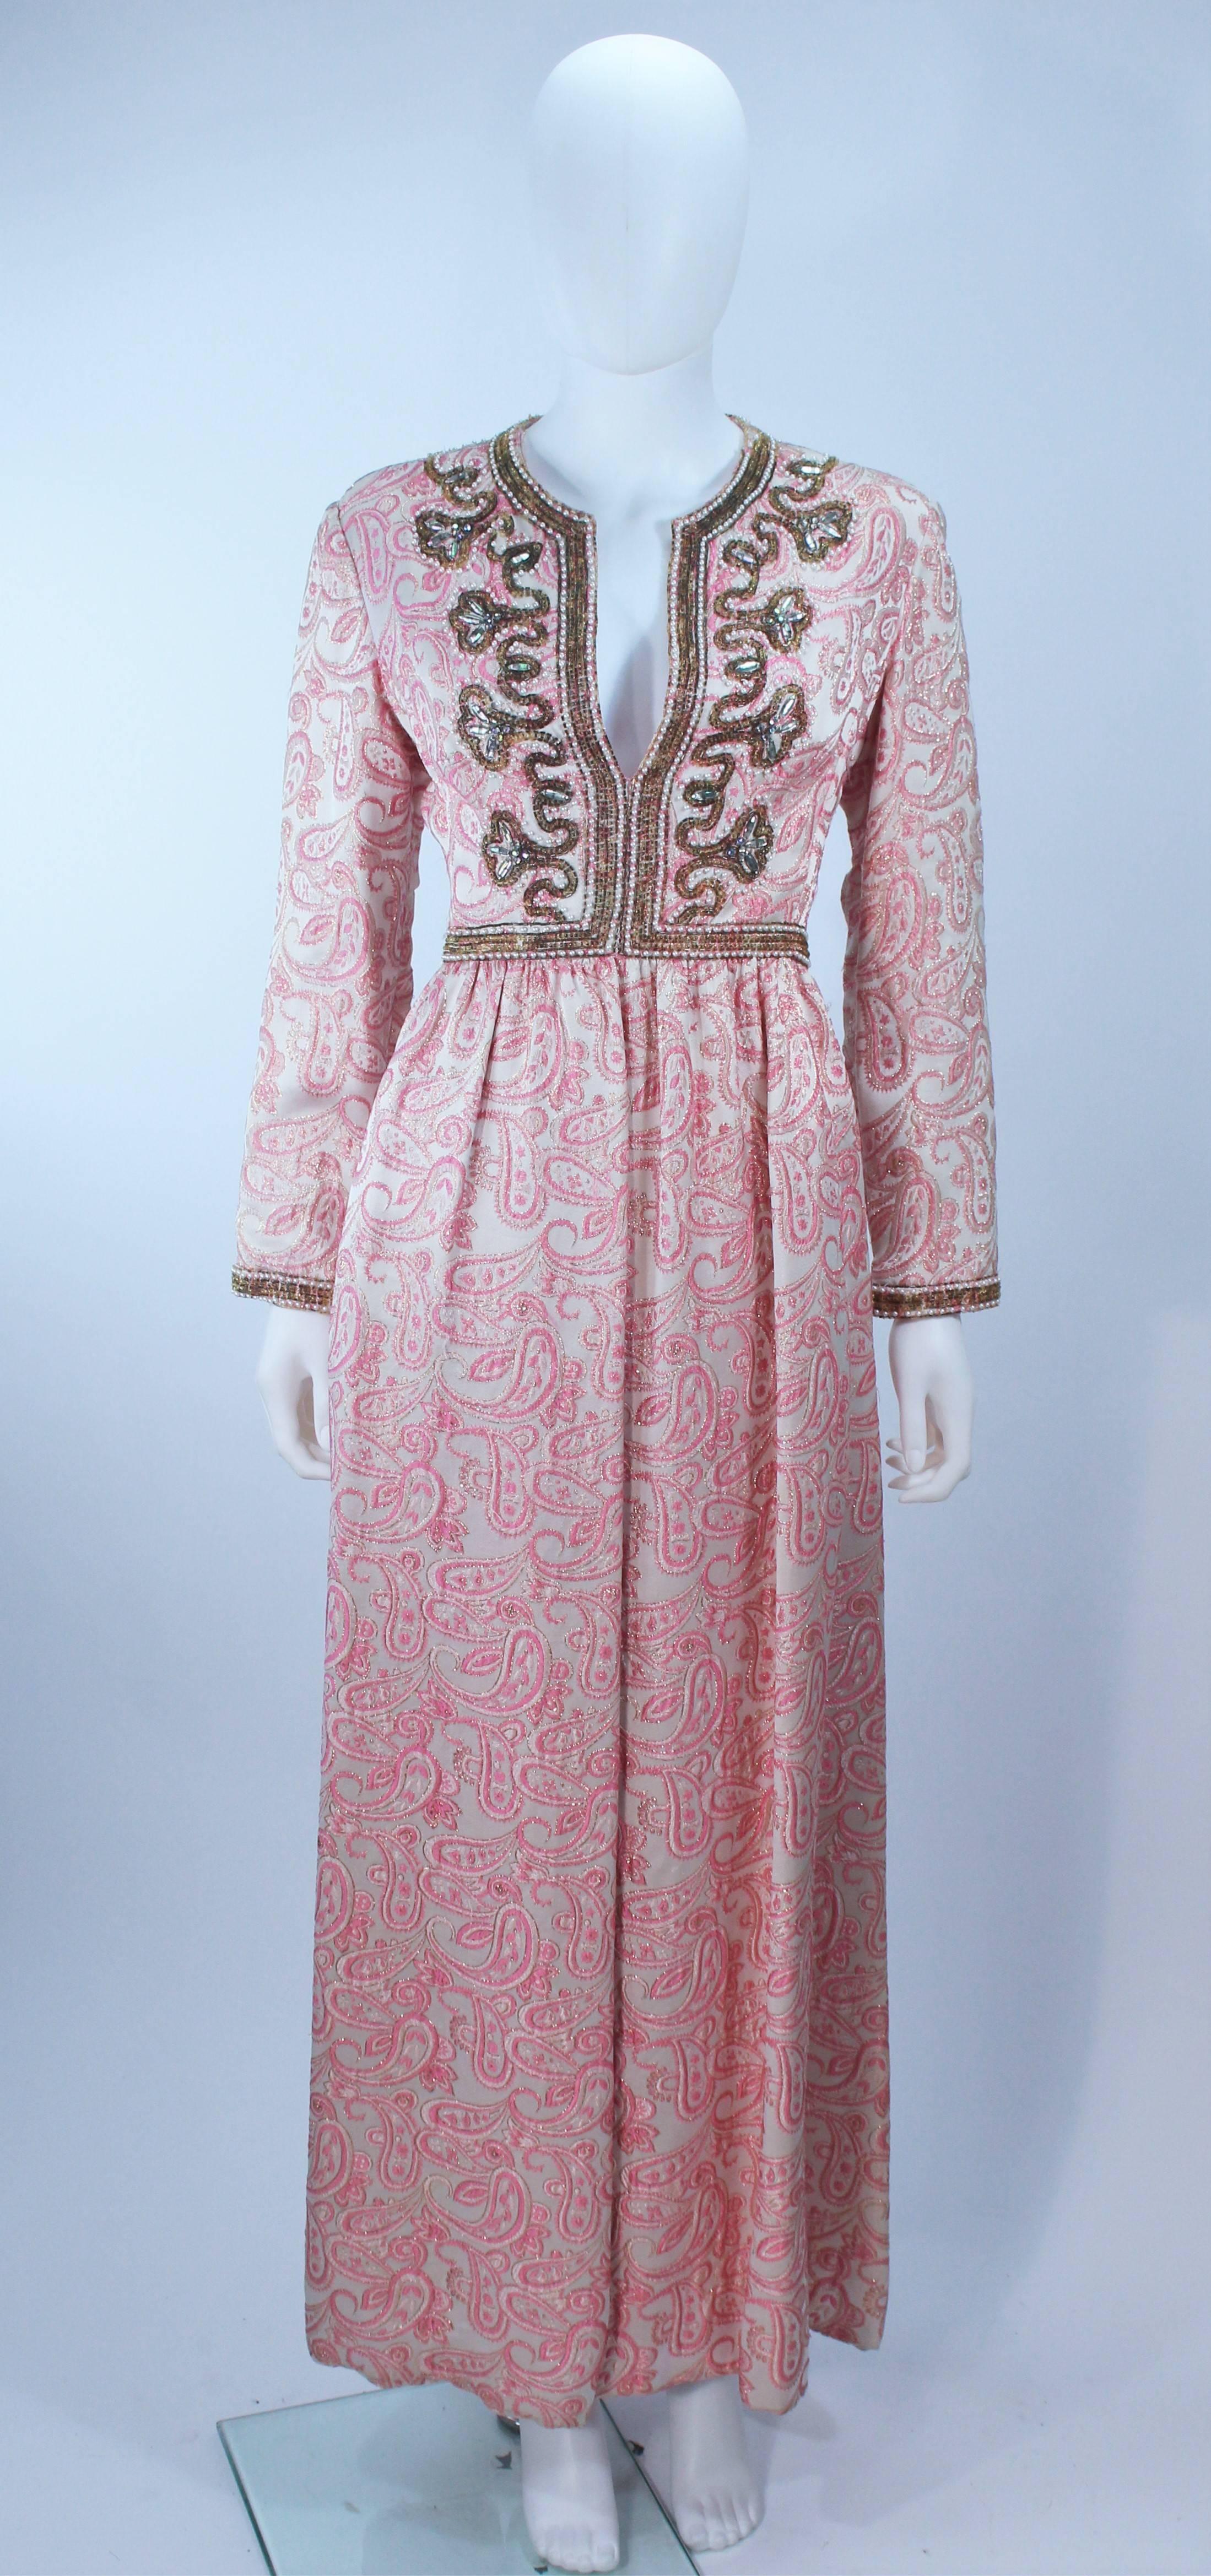 This Ceil Chapman gown is composed of a pink paisley brocade and features an embellished neckline. There are side pockets with a center back zipper closure. In excellent vintage condition.

  **Please cross-reference measurements for personal